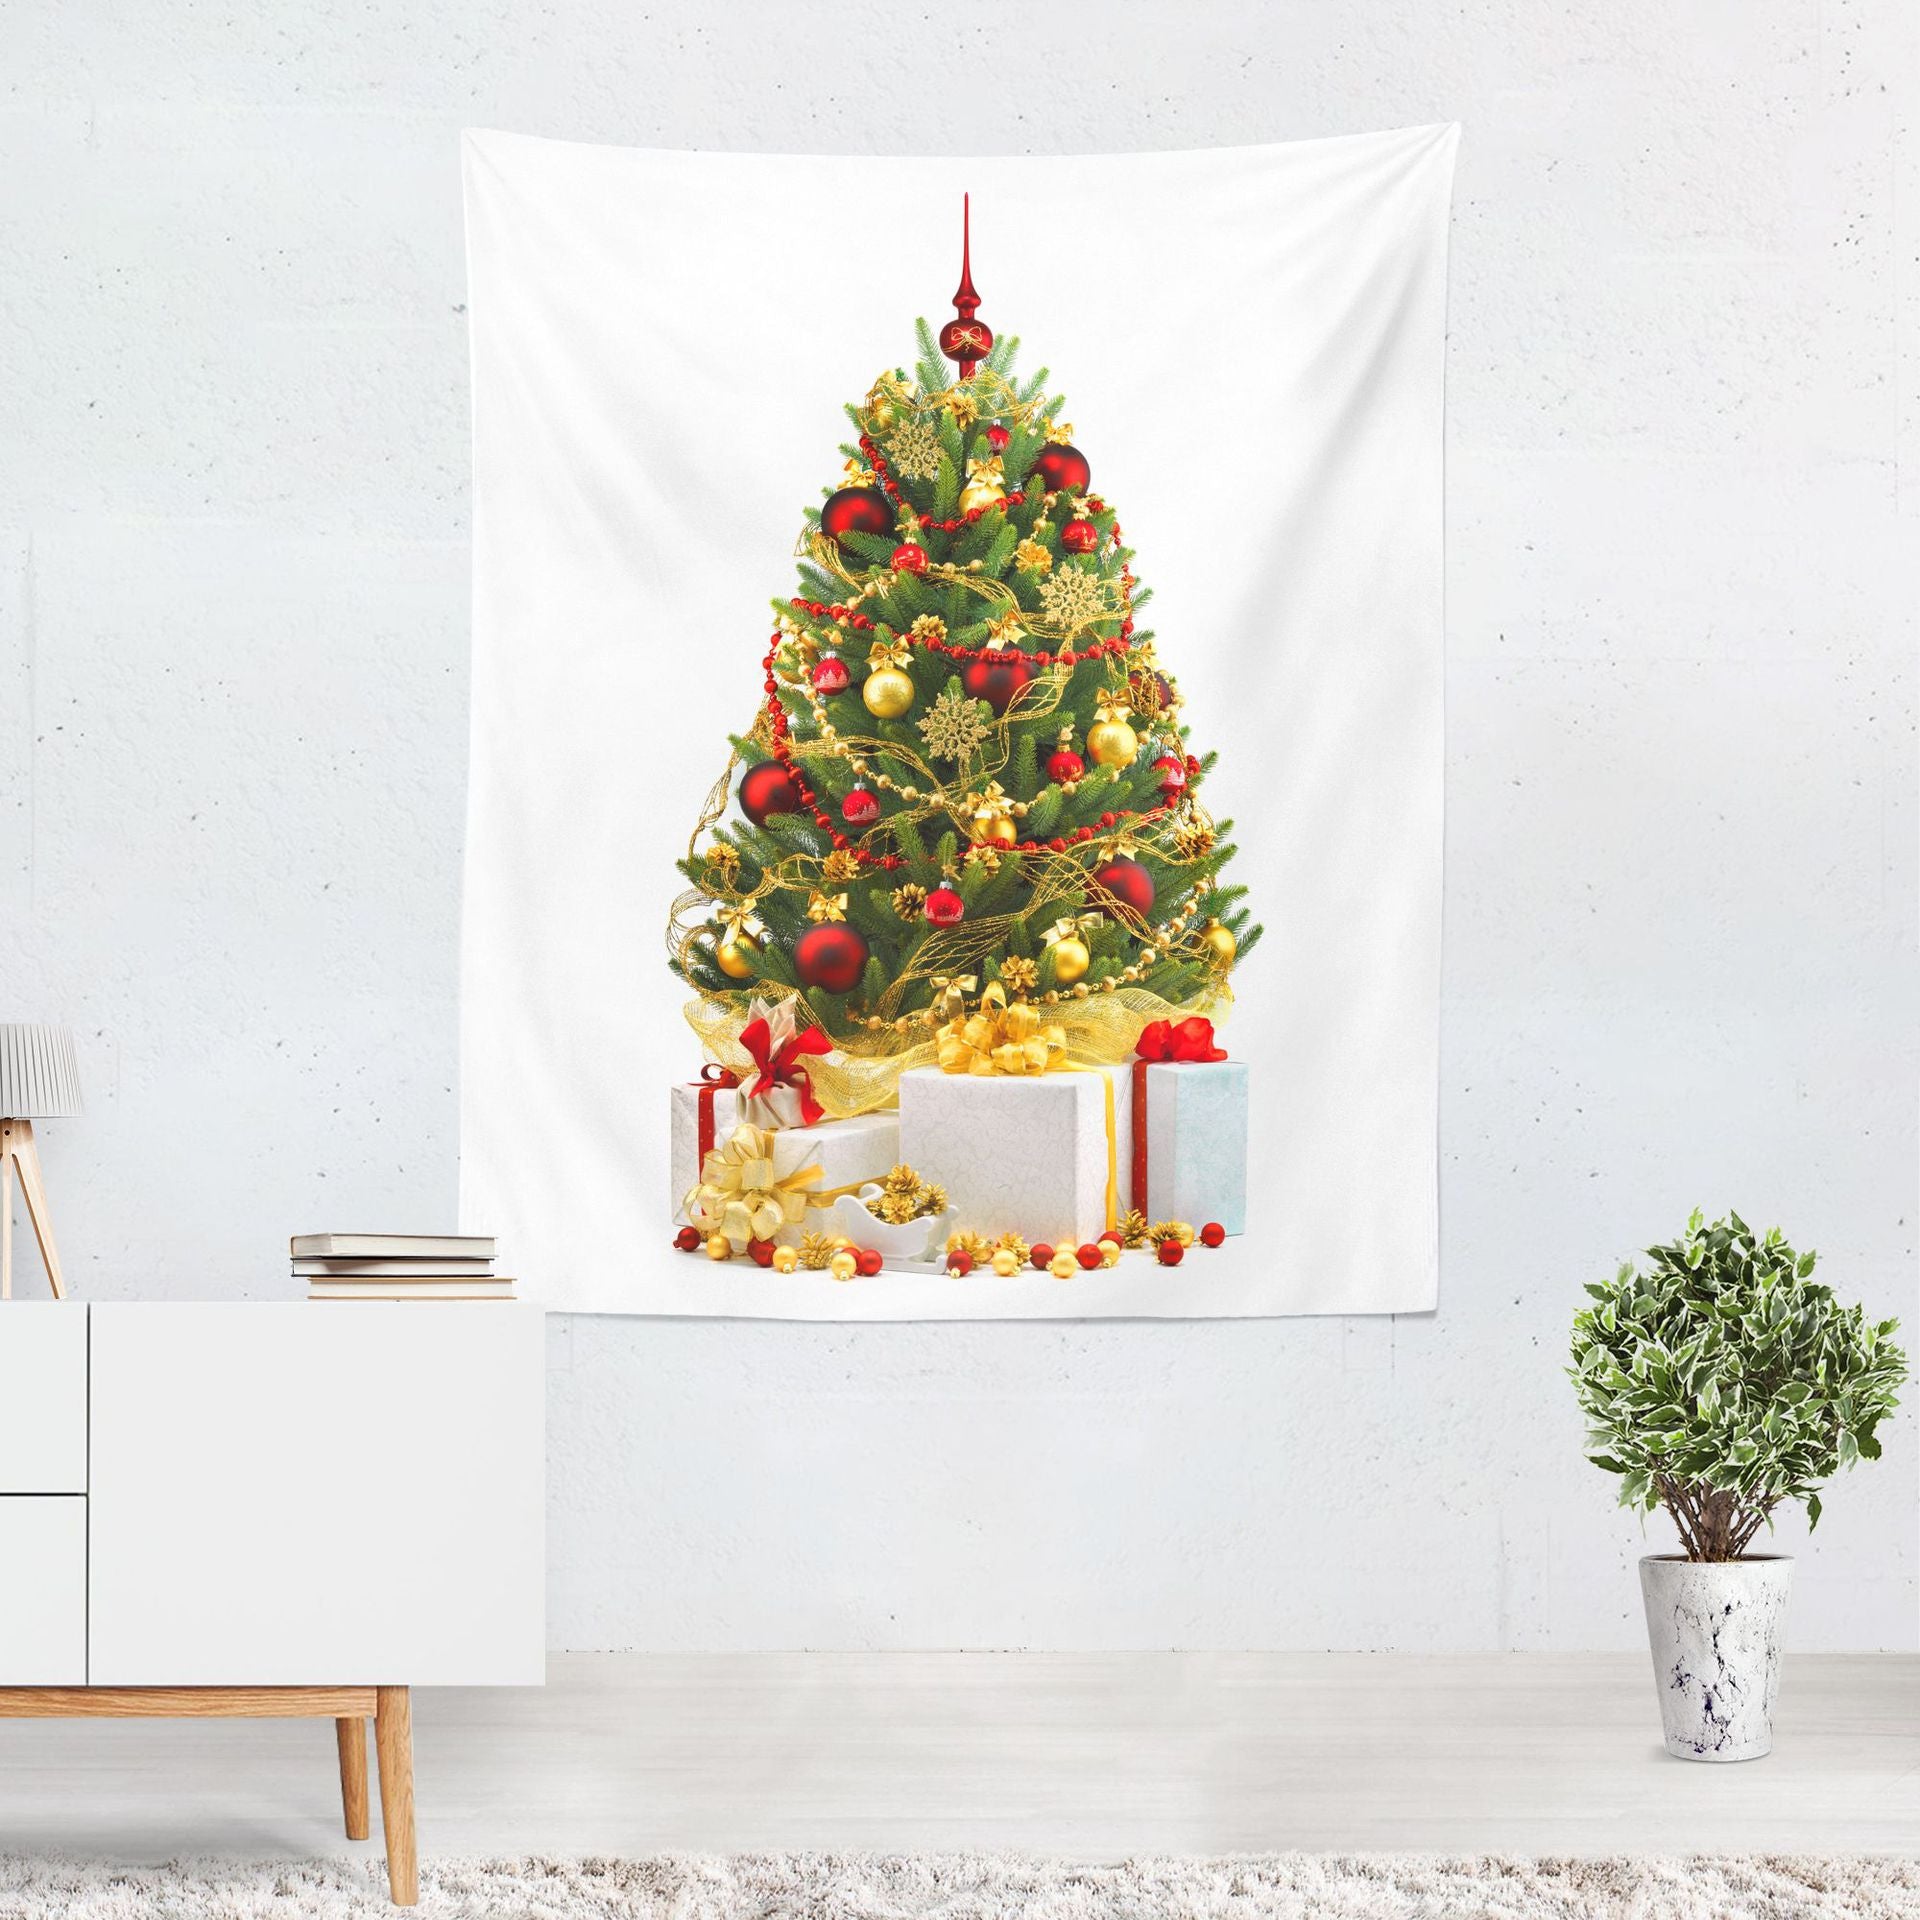 Christmas Tree Tapestry For Home Wall Decor